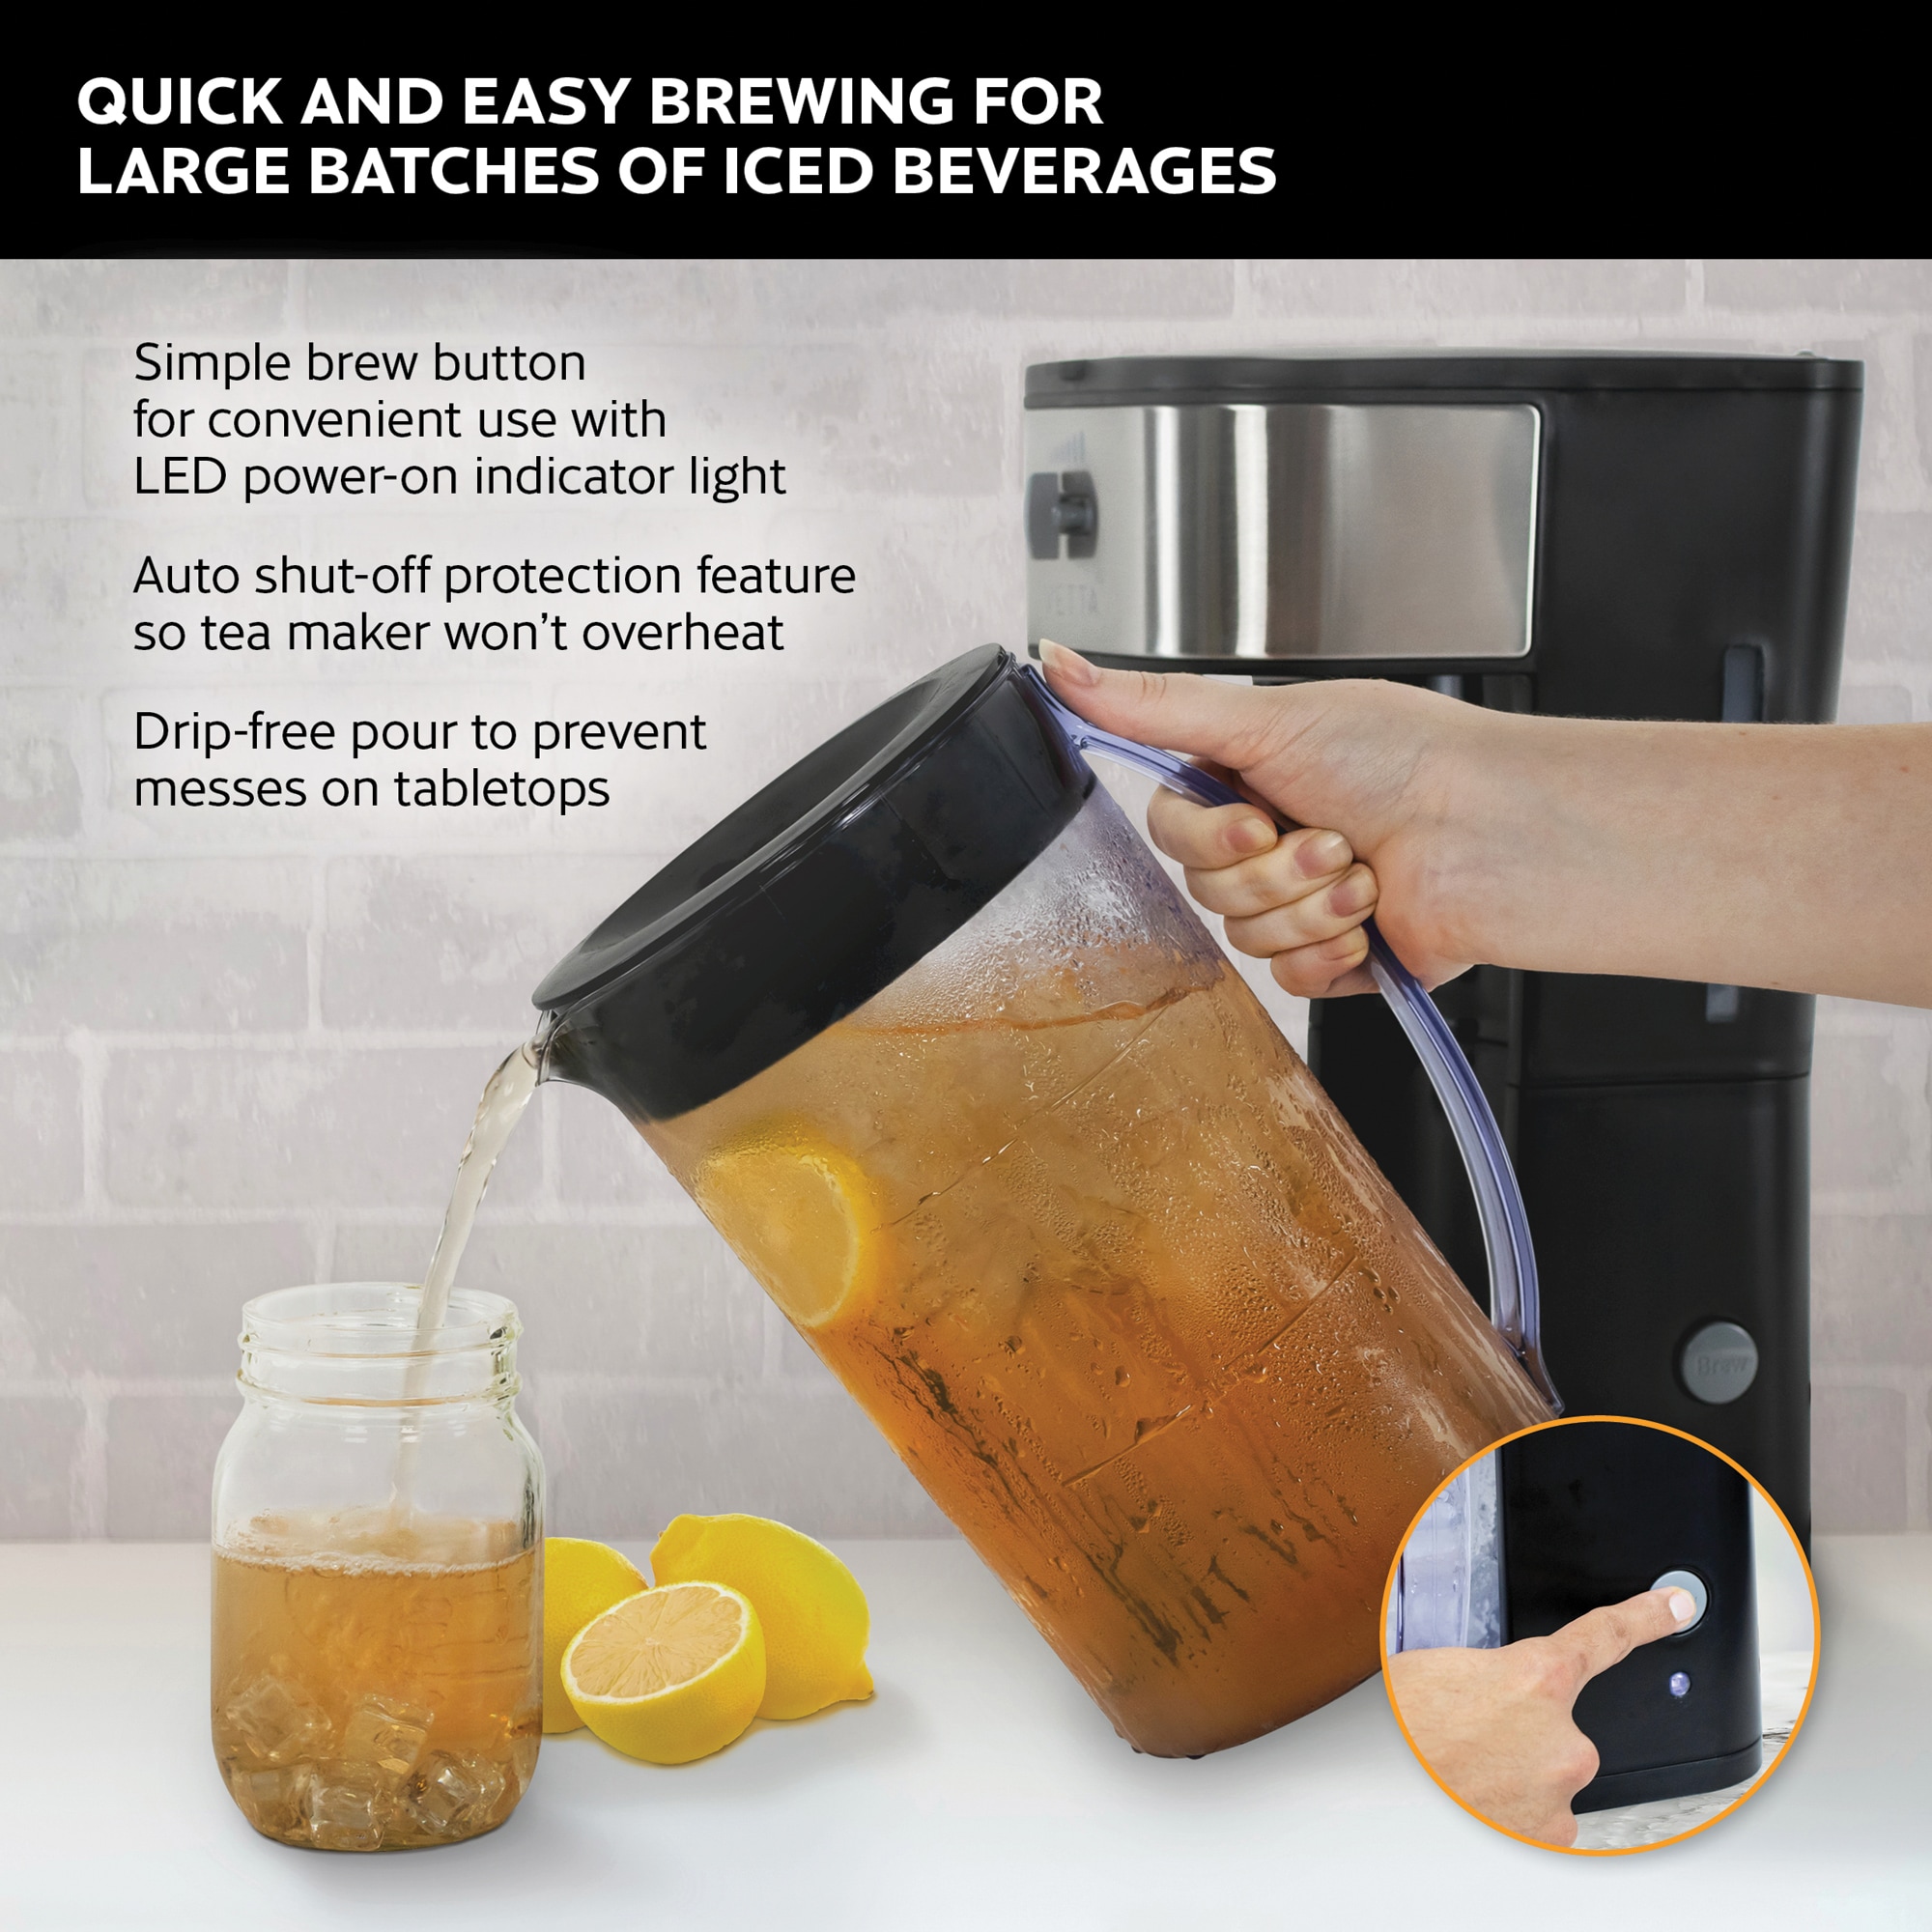  Nostalgia CLIT3PLSAQ Classic Retro 3-Quart Iced Tea & Coffee  Brewing System With Double-Insulated Pitcher, Auto Shut-Off, Perfect For  Cold Lattes, Lemonade, Flavored Water, Includes Reusable Filter: Home &  Kitchen